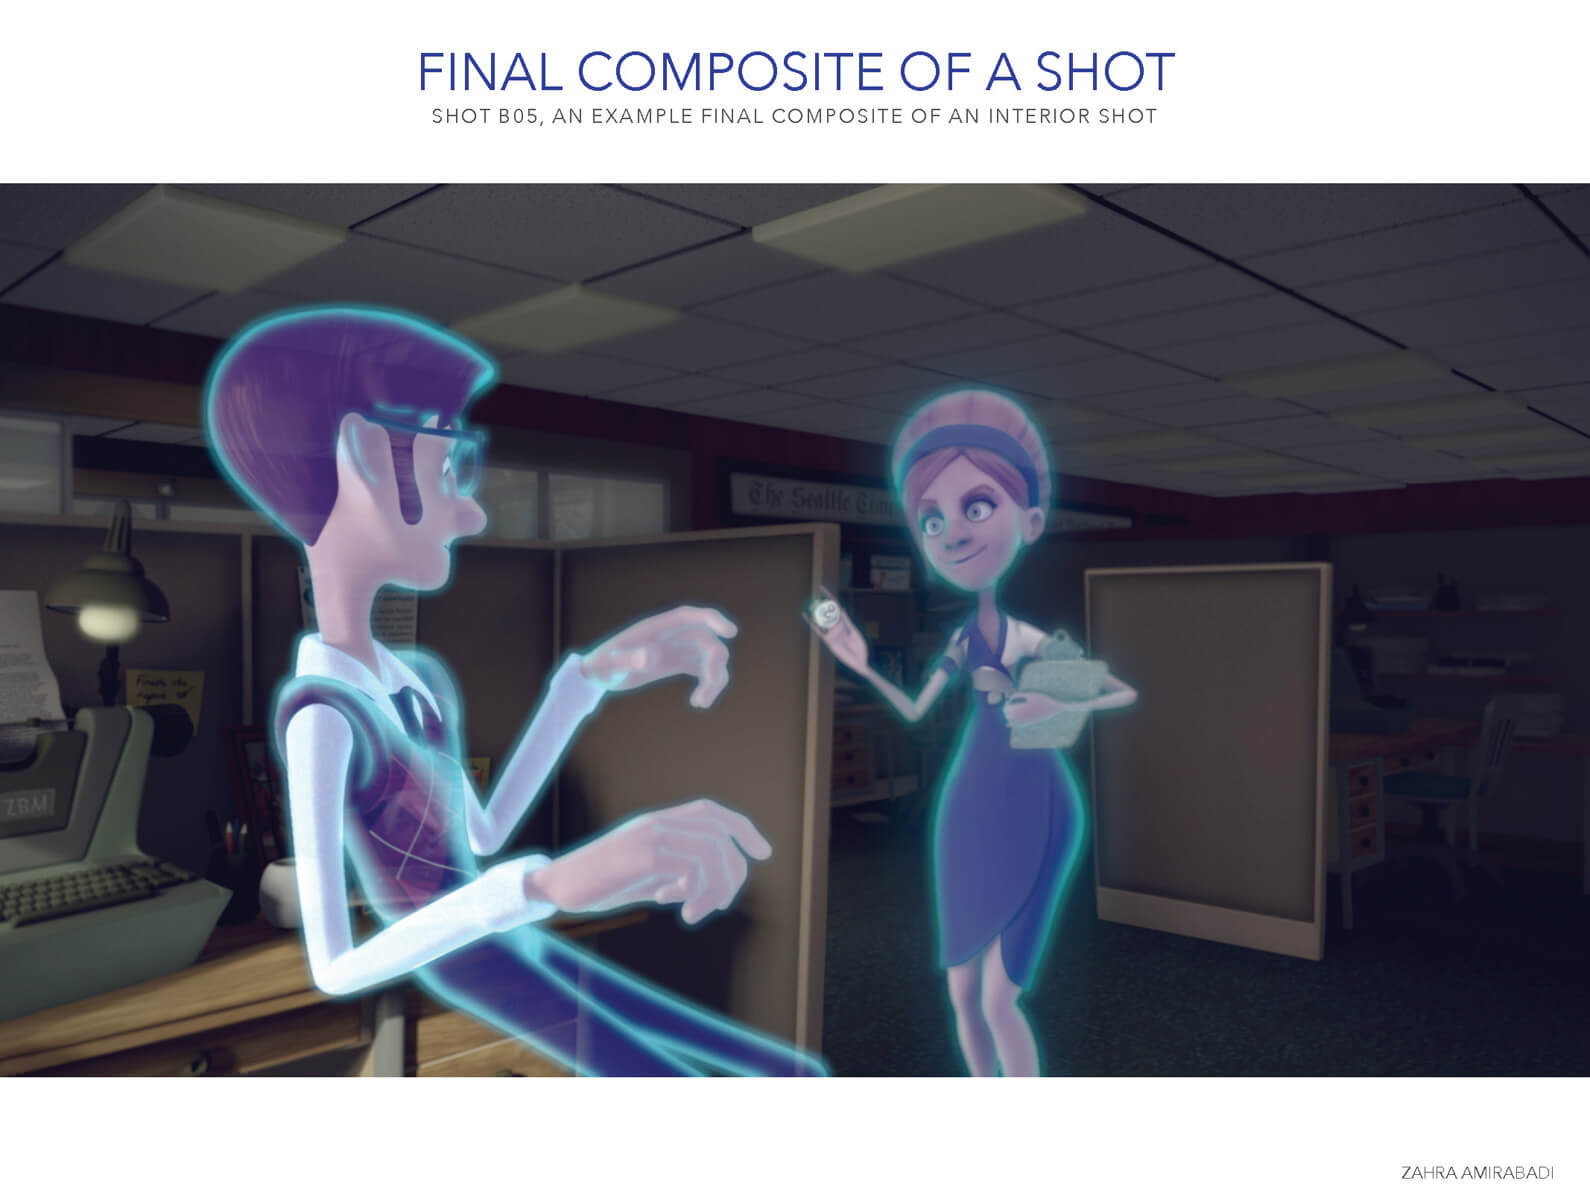 Final composite of a shot of the man and woman ghosts in an office setting in Orientation Center for the Unseen